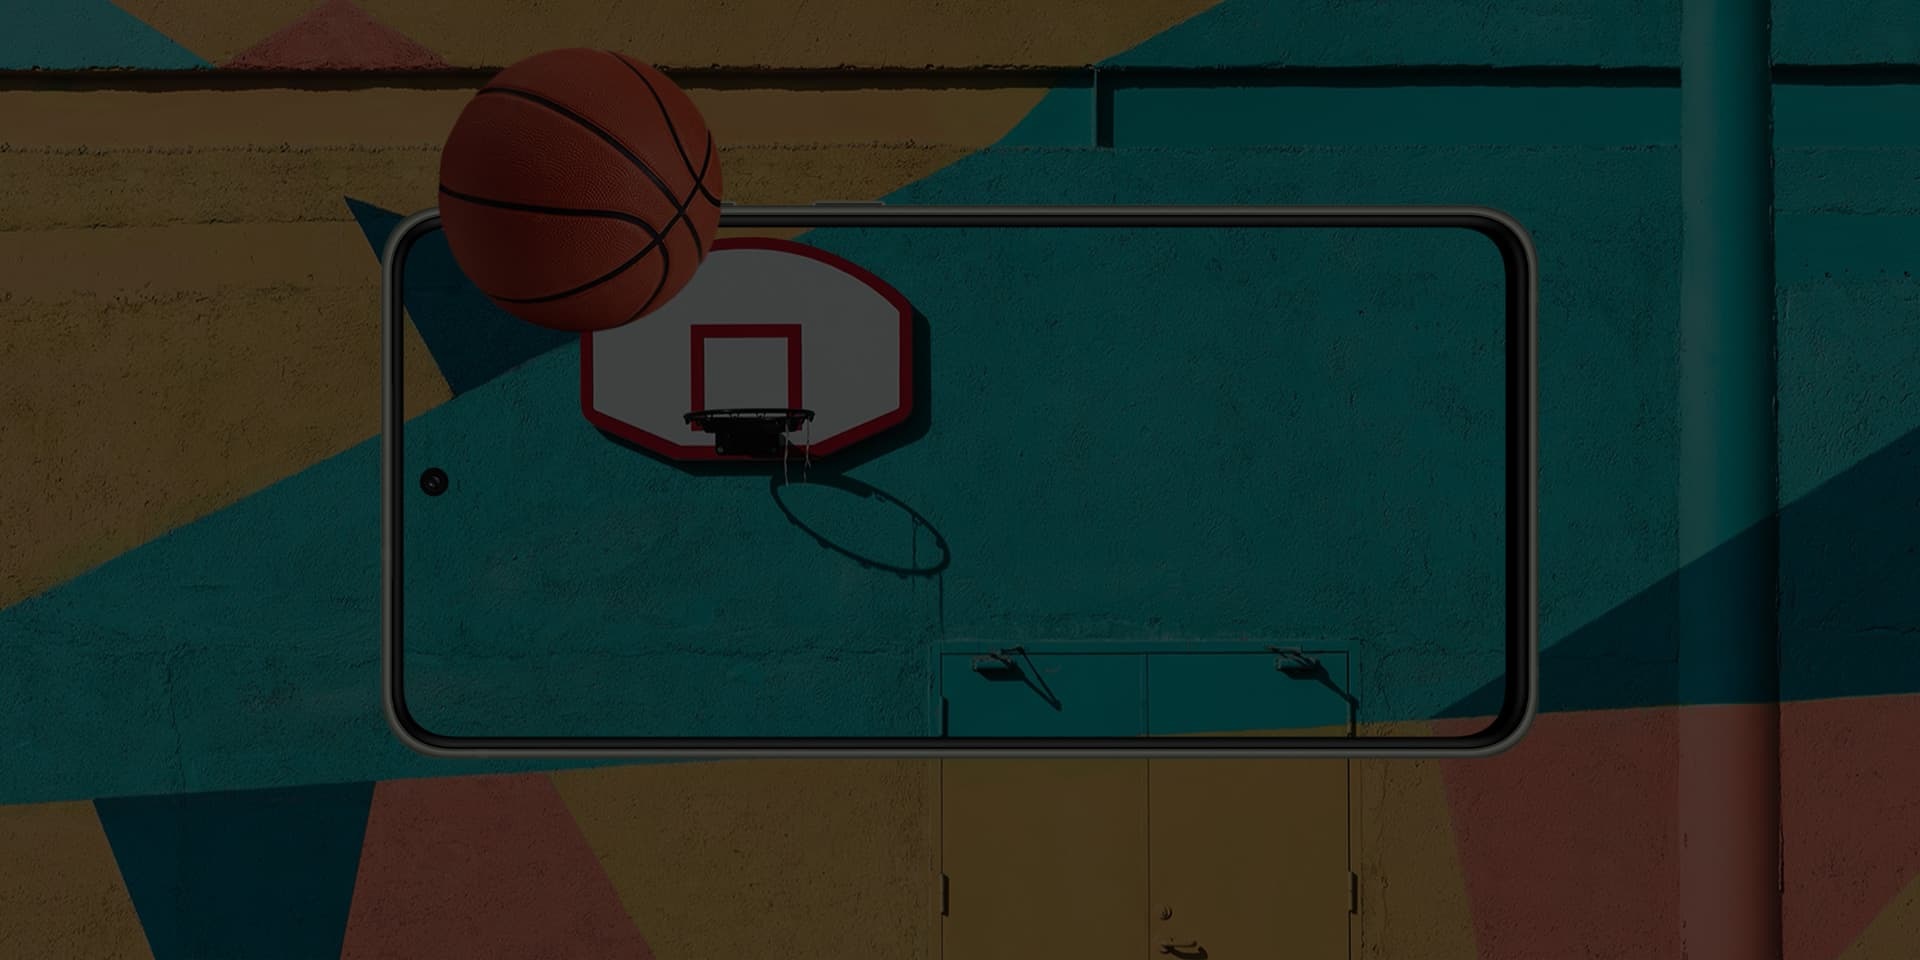 Scene of basketball next to a basketball hoop. The scene is seen on Galaxy S21 FE 5G’s screen and continues off-screen to demonstrate the realistic picture.